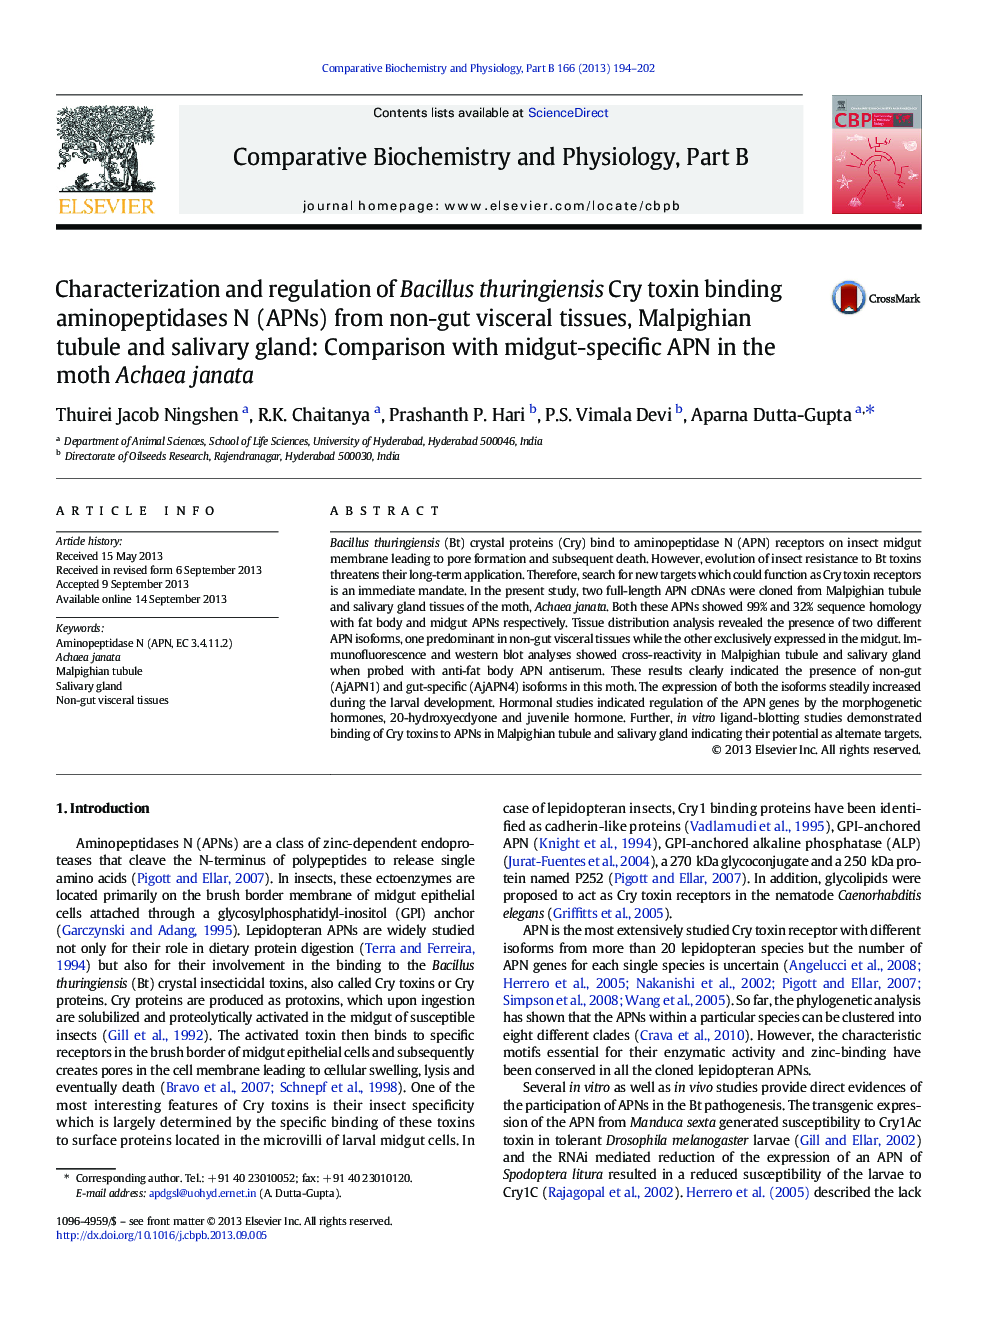 Characterization and regulation of Bacillus thuringiensis Cry toxin binding aminopeptidases N (APNs) from non-gut visceral tissues, Malpighian tubule and salivary gland: Comparison with midgut-specific APN in the moth Achaea janata